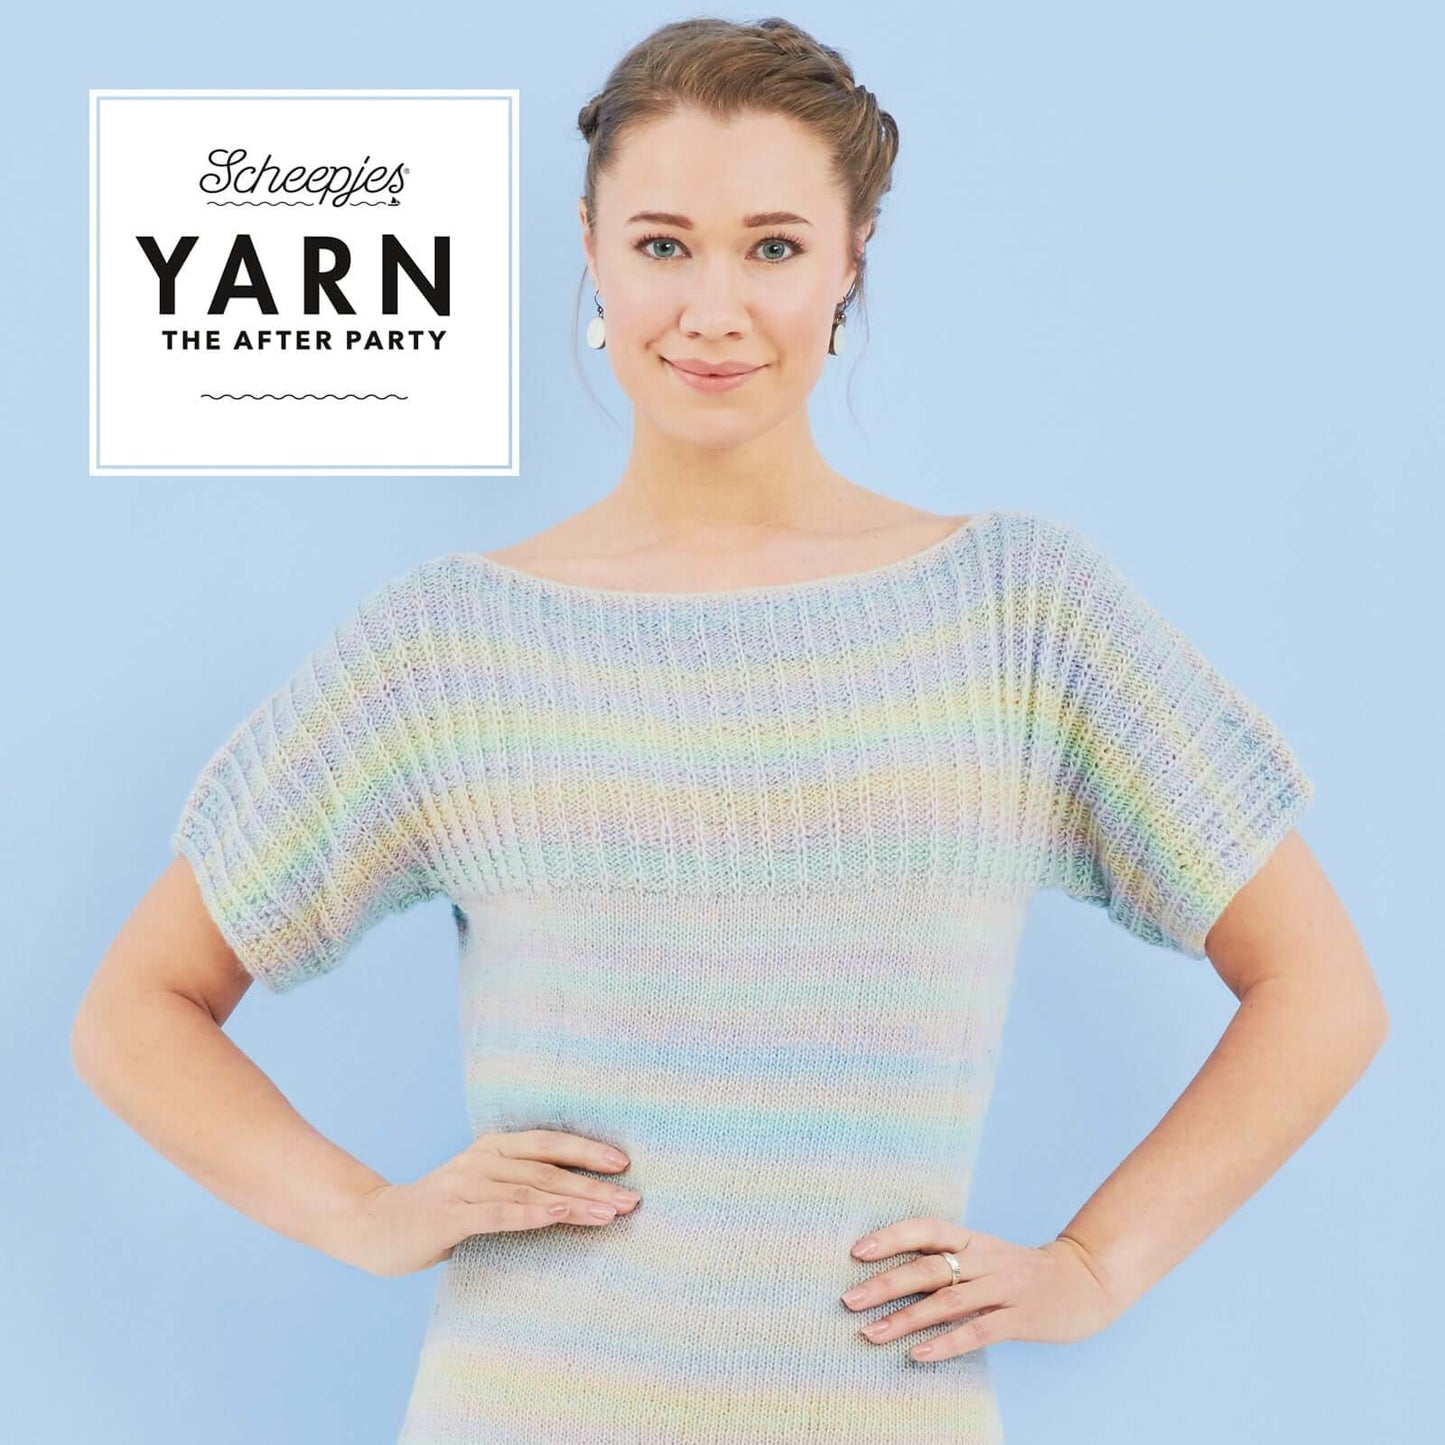 Scheepjes Yarn The After Party no. 43 - Pegasus Tunic (booklet) - (Knit)